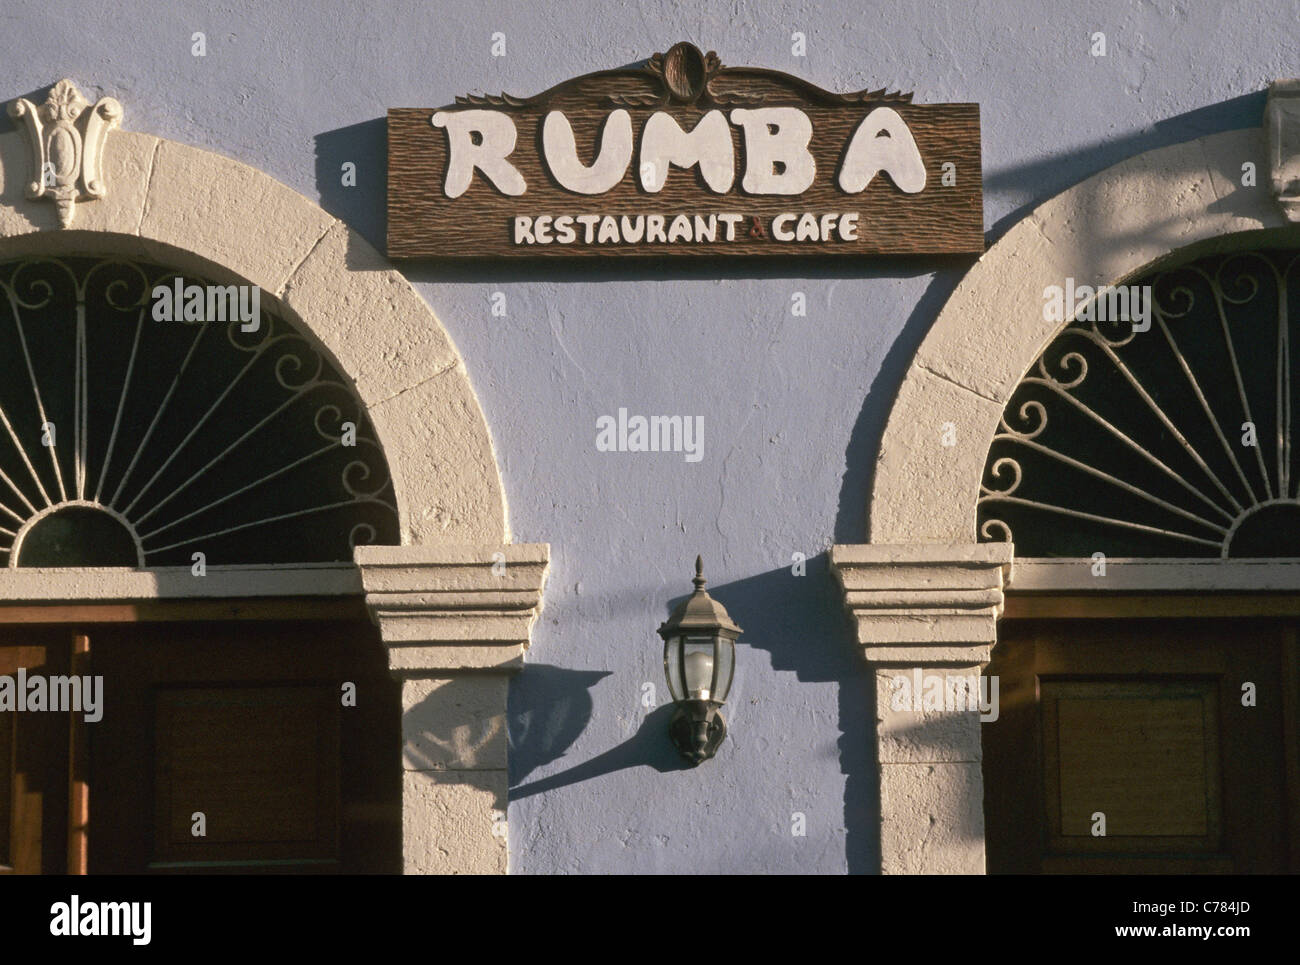 Rumba Restaurant Cafe in the old town of San Juan in Puerto Rico, Caribbean Stock Photo